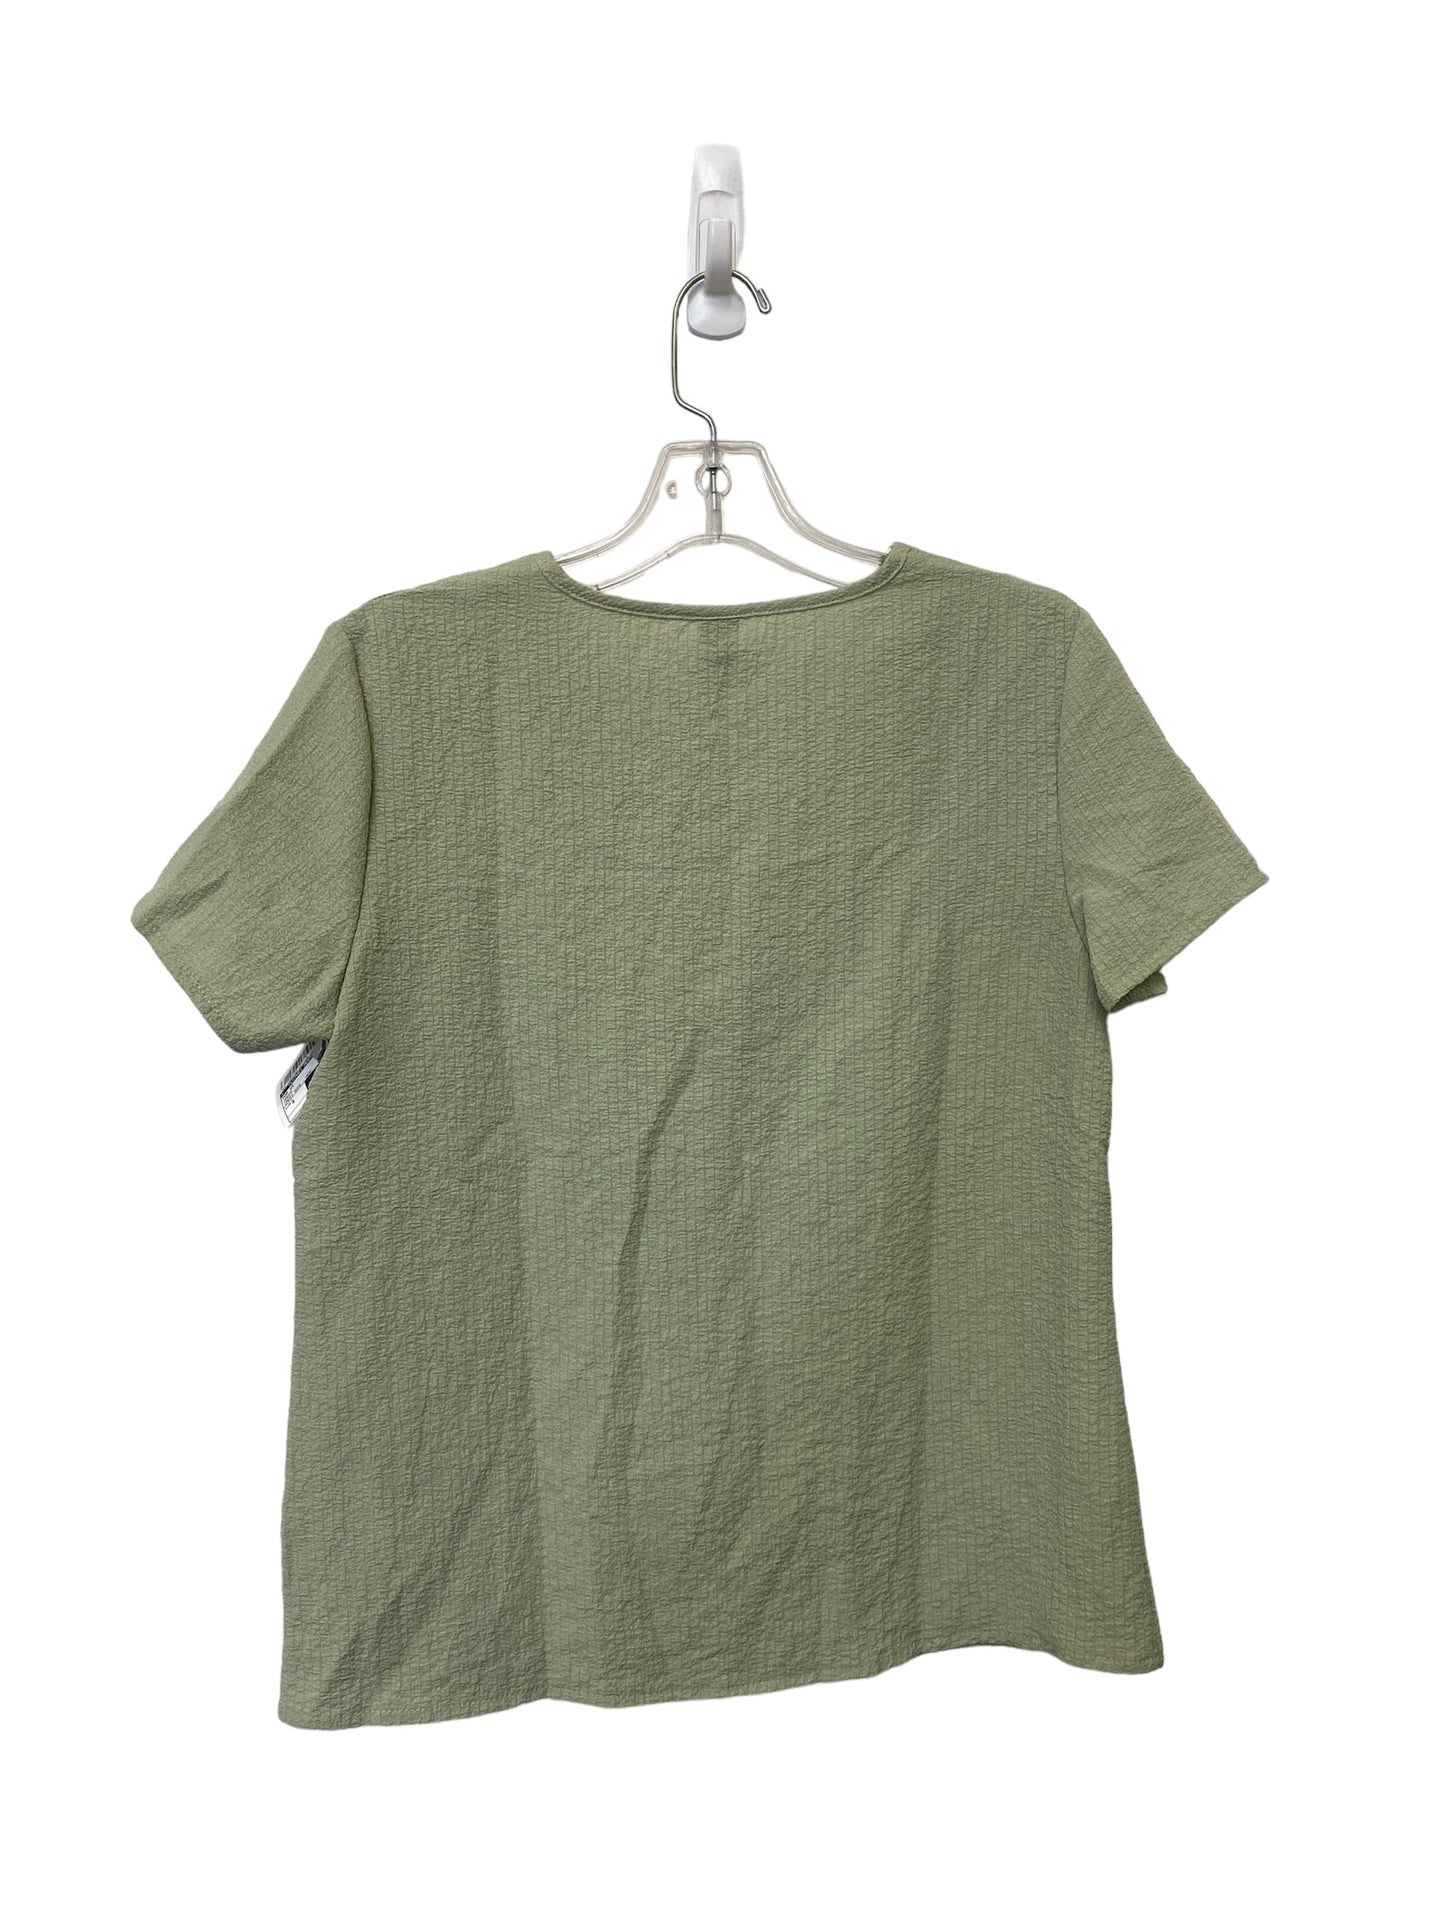 Green Top Short Sleeve Clothes Mentor, Size S